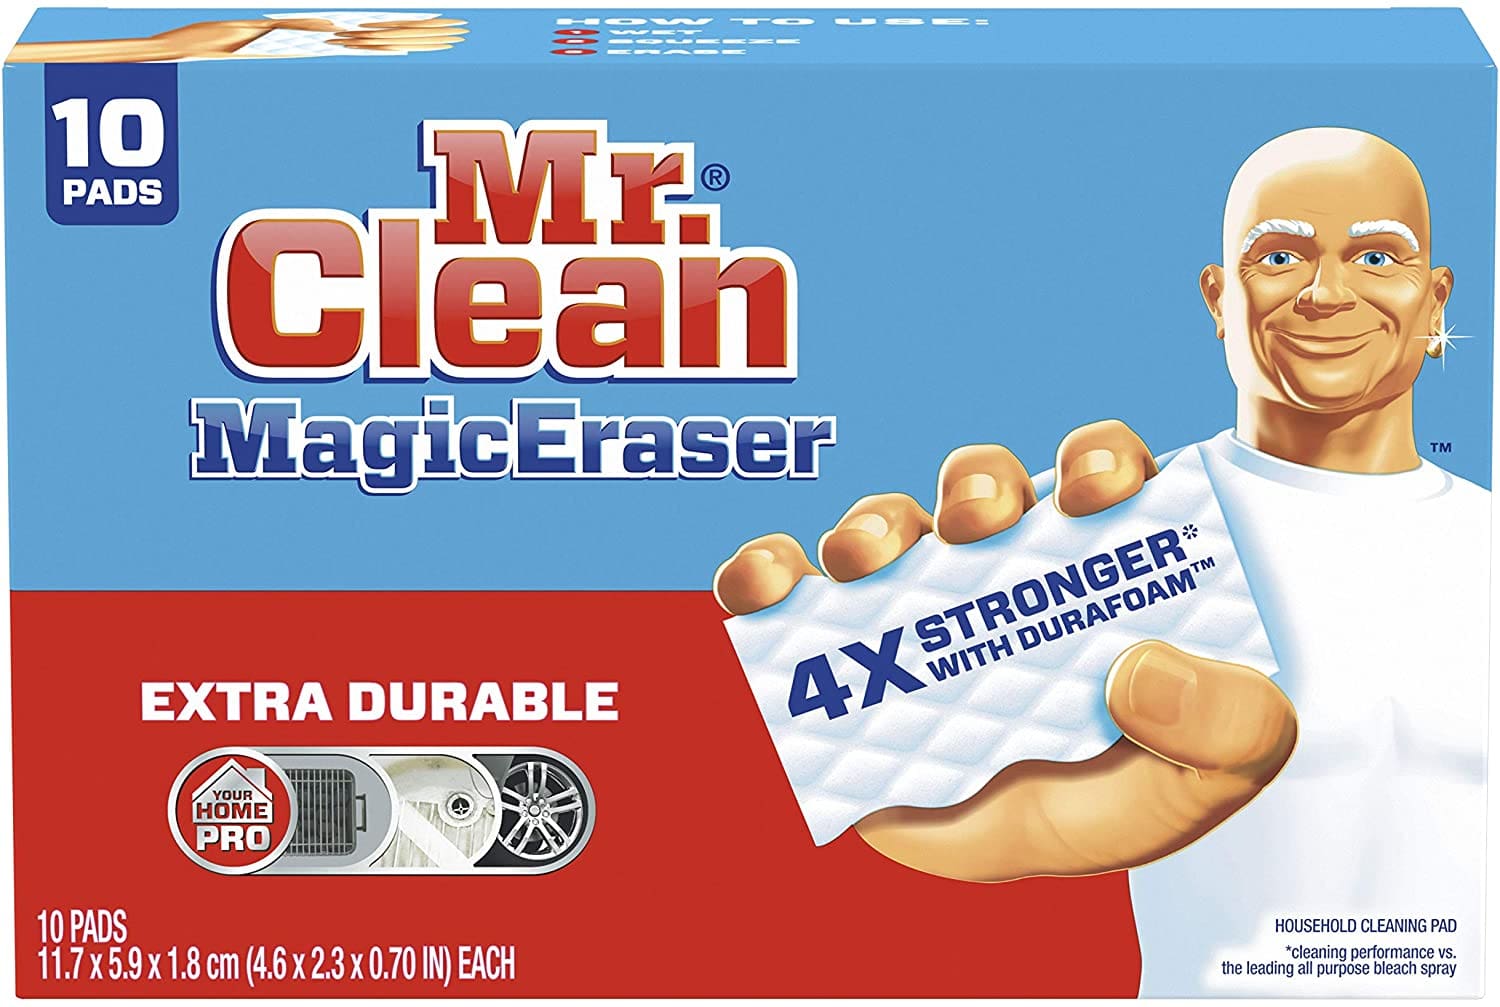 Mr. Clean MagicEraser Extra Durable Banner